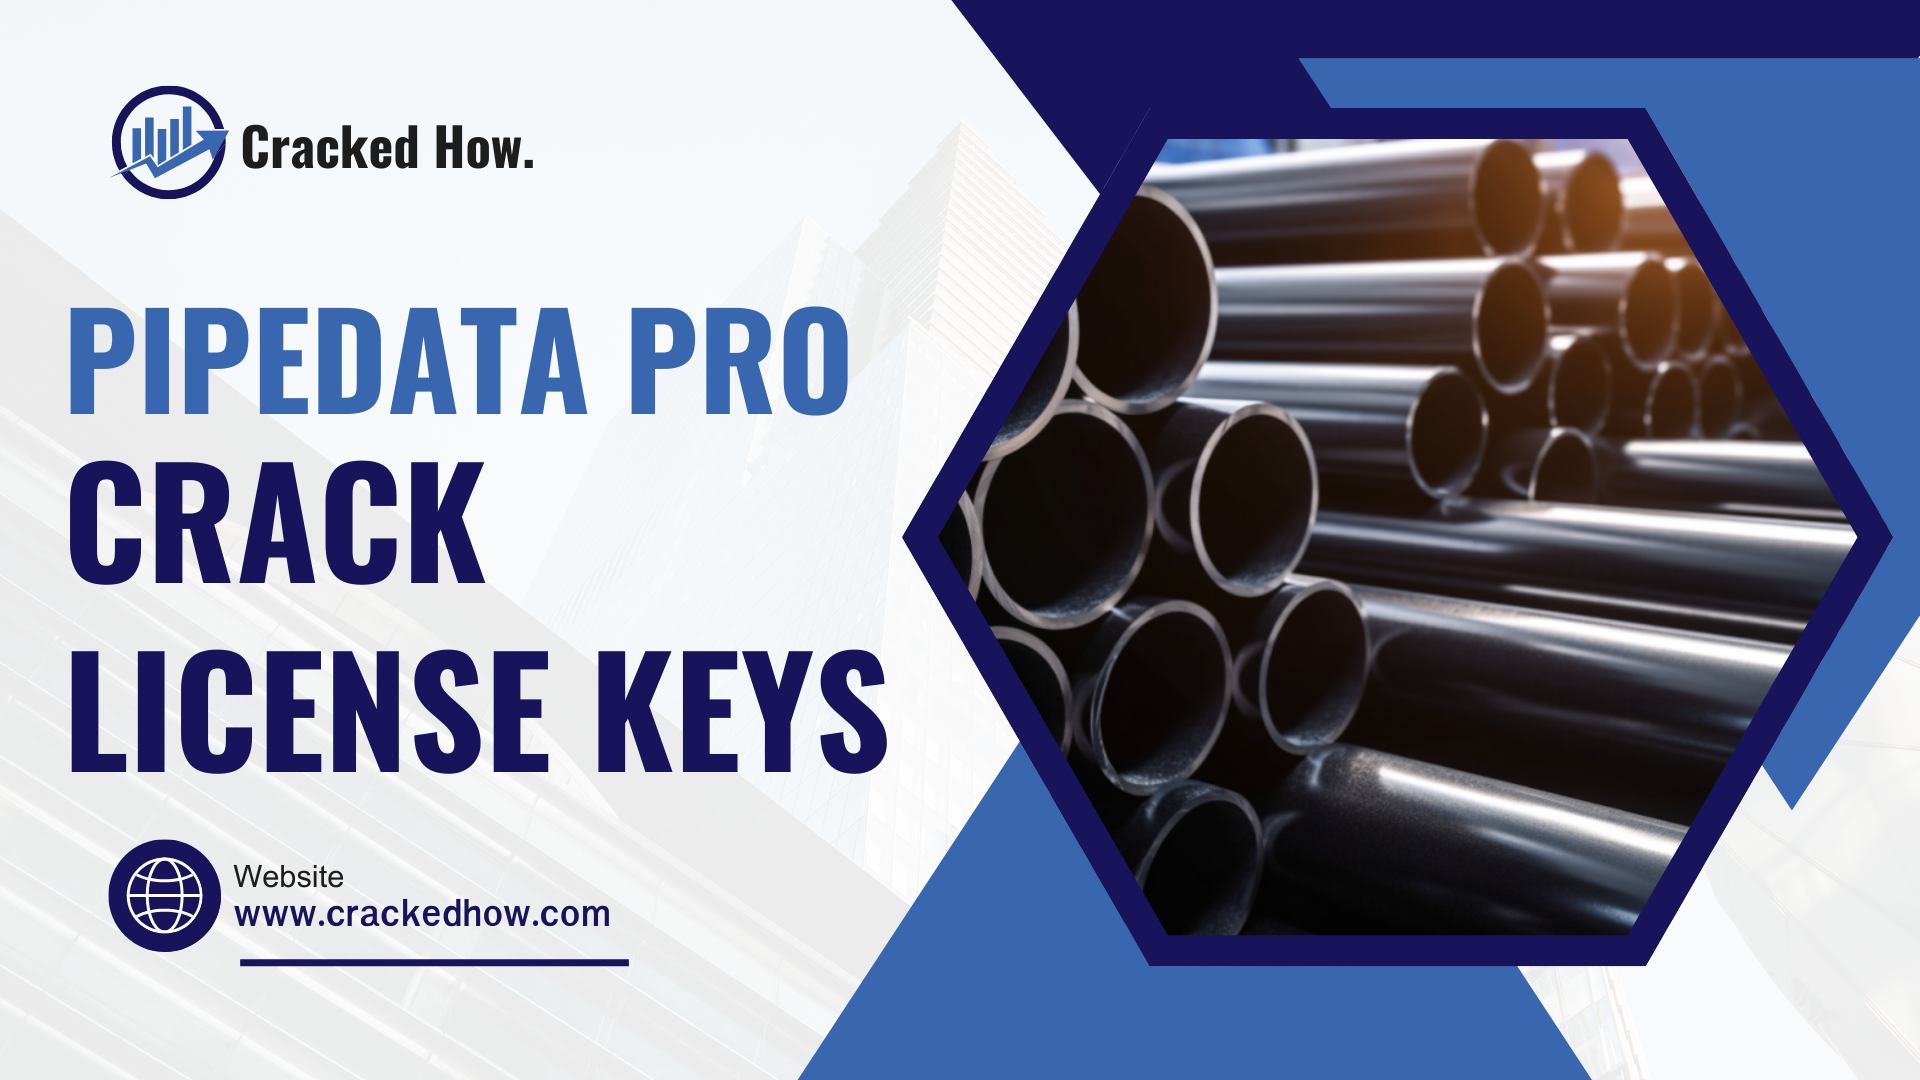 PipeData Pro Crack with License Keys